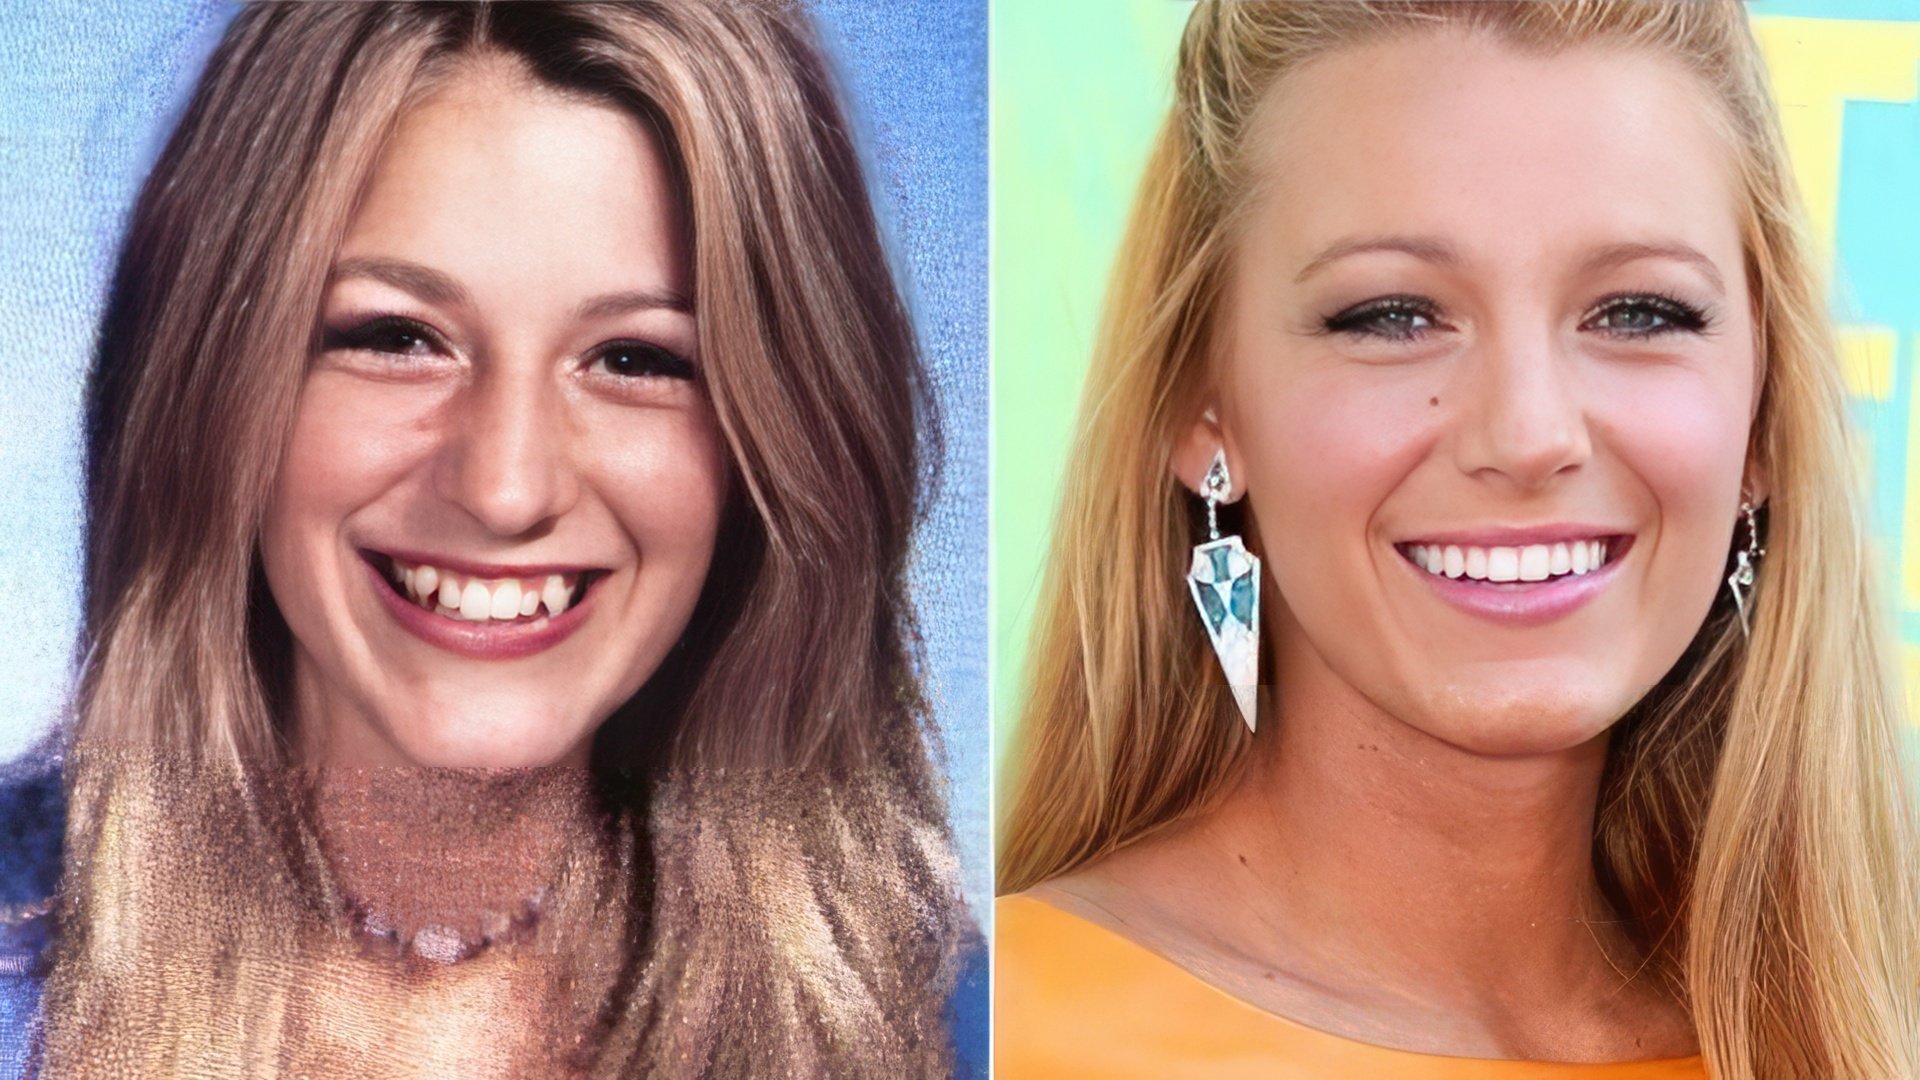 The young Blake Lively had a ton of admirers